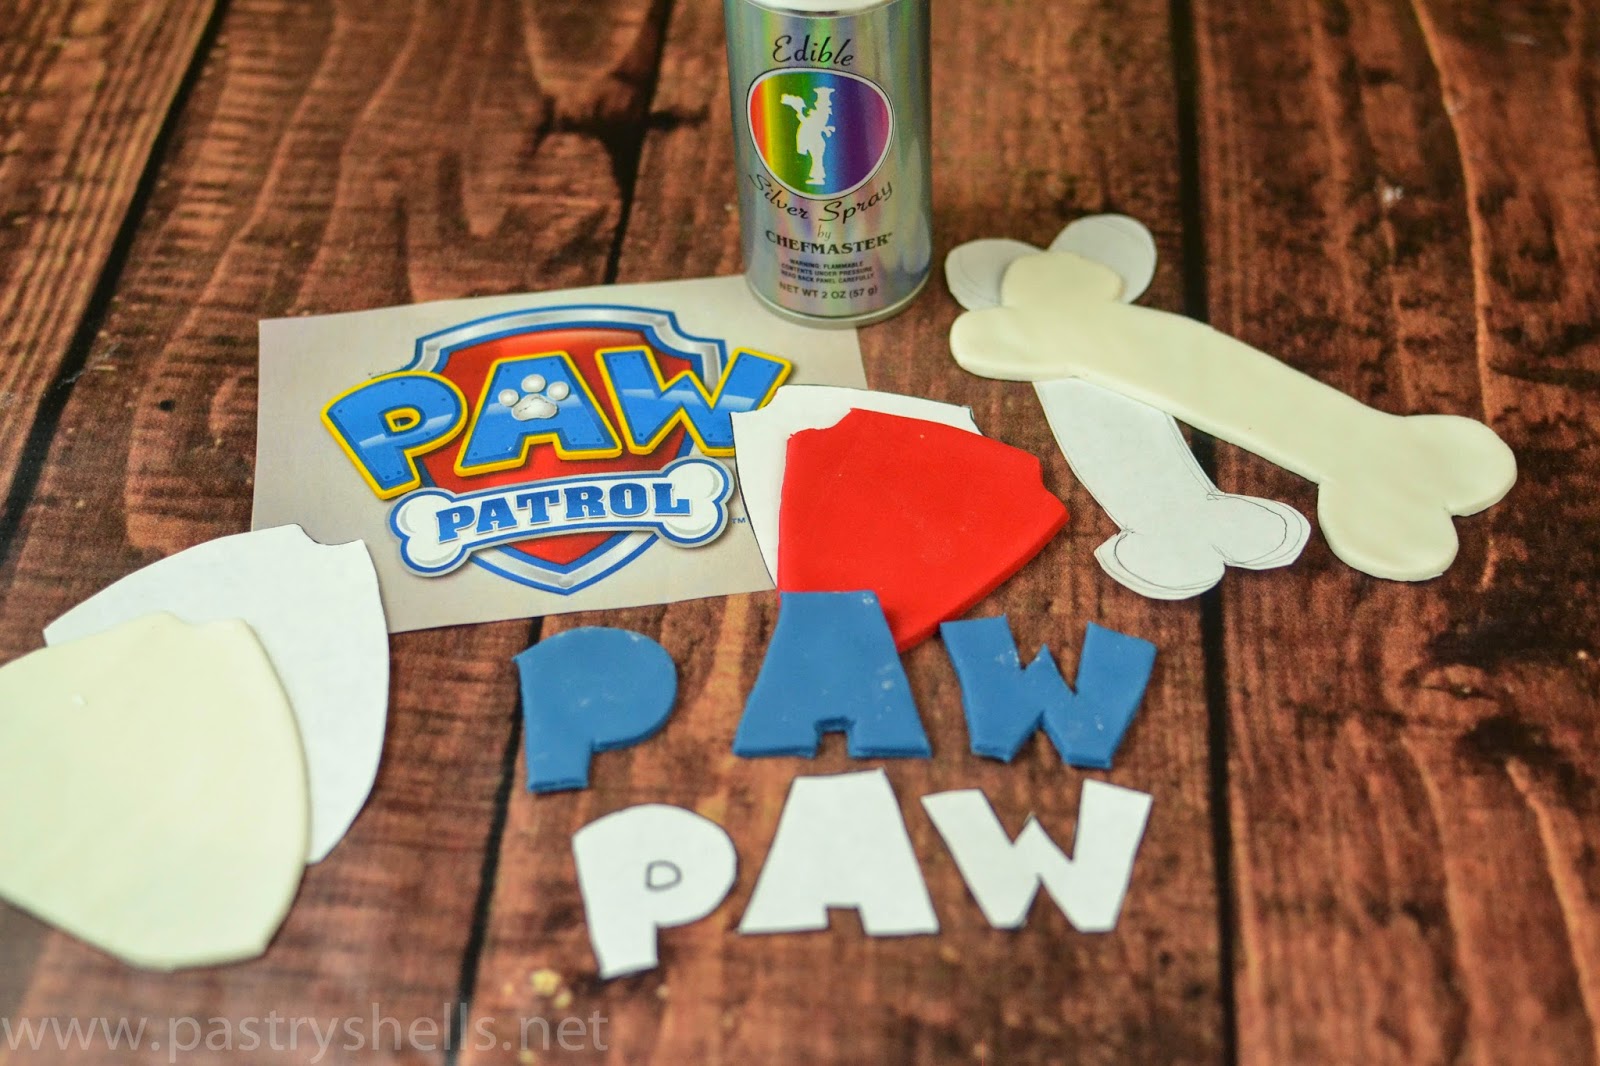 Tumult Foran dig Parametre Surprisingly Simple Free Paw Patrol Cake How To - Pastry Shells